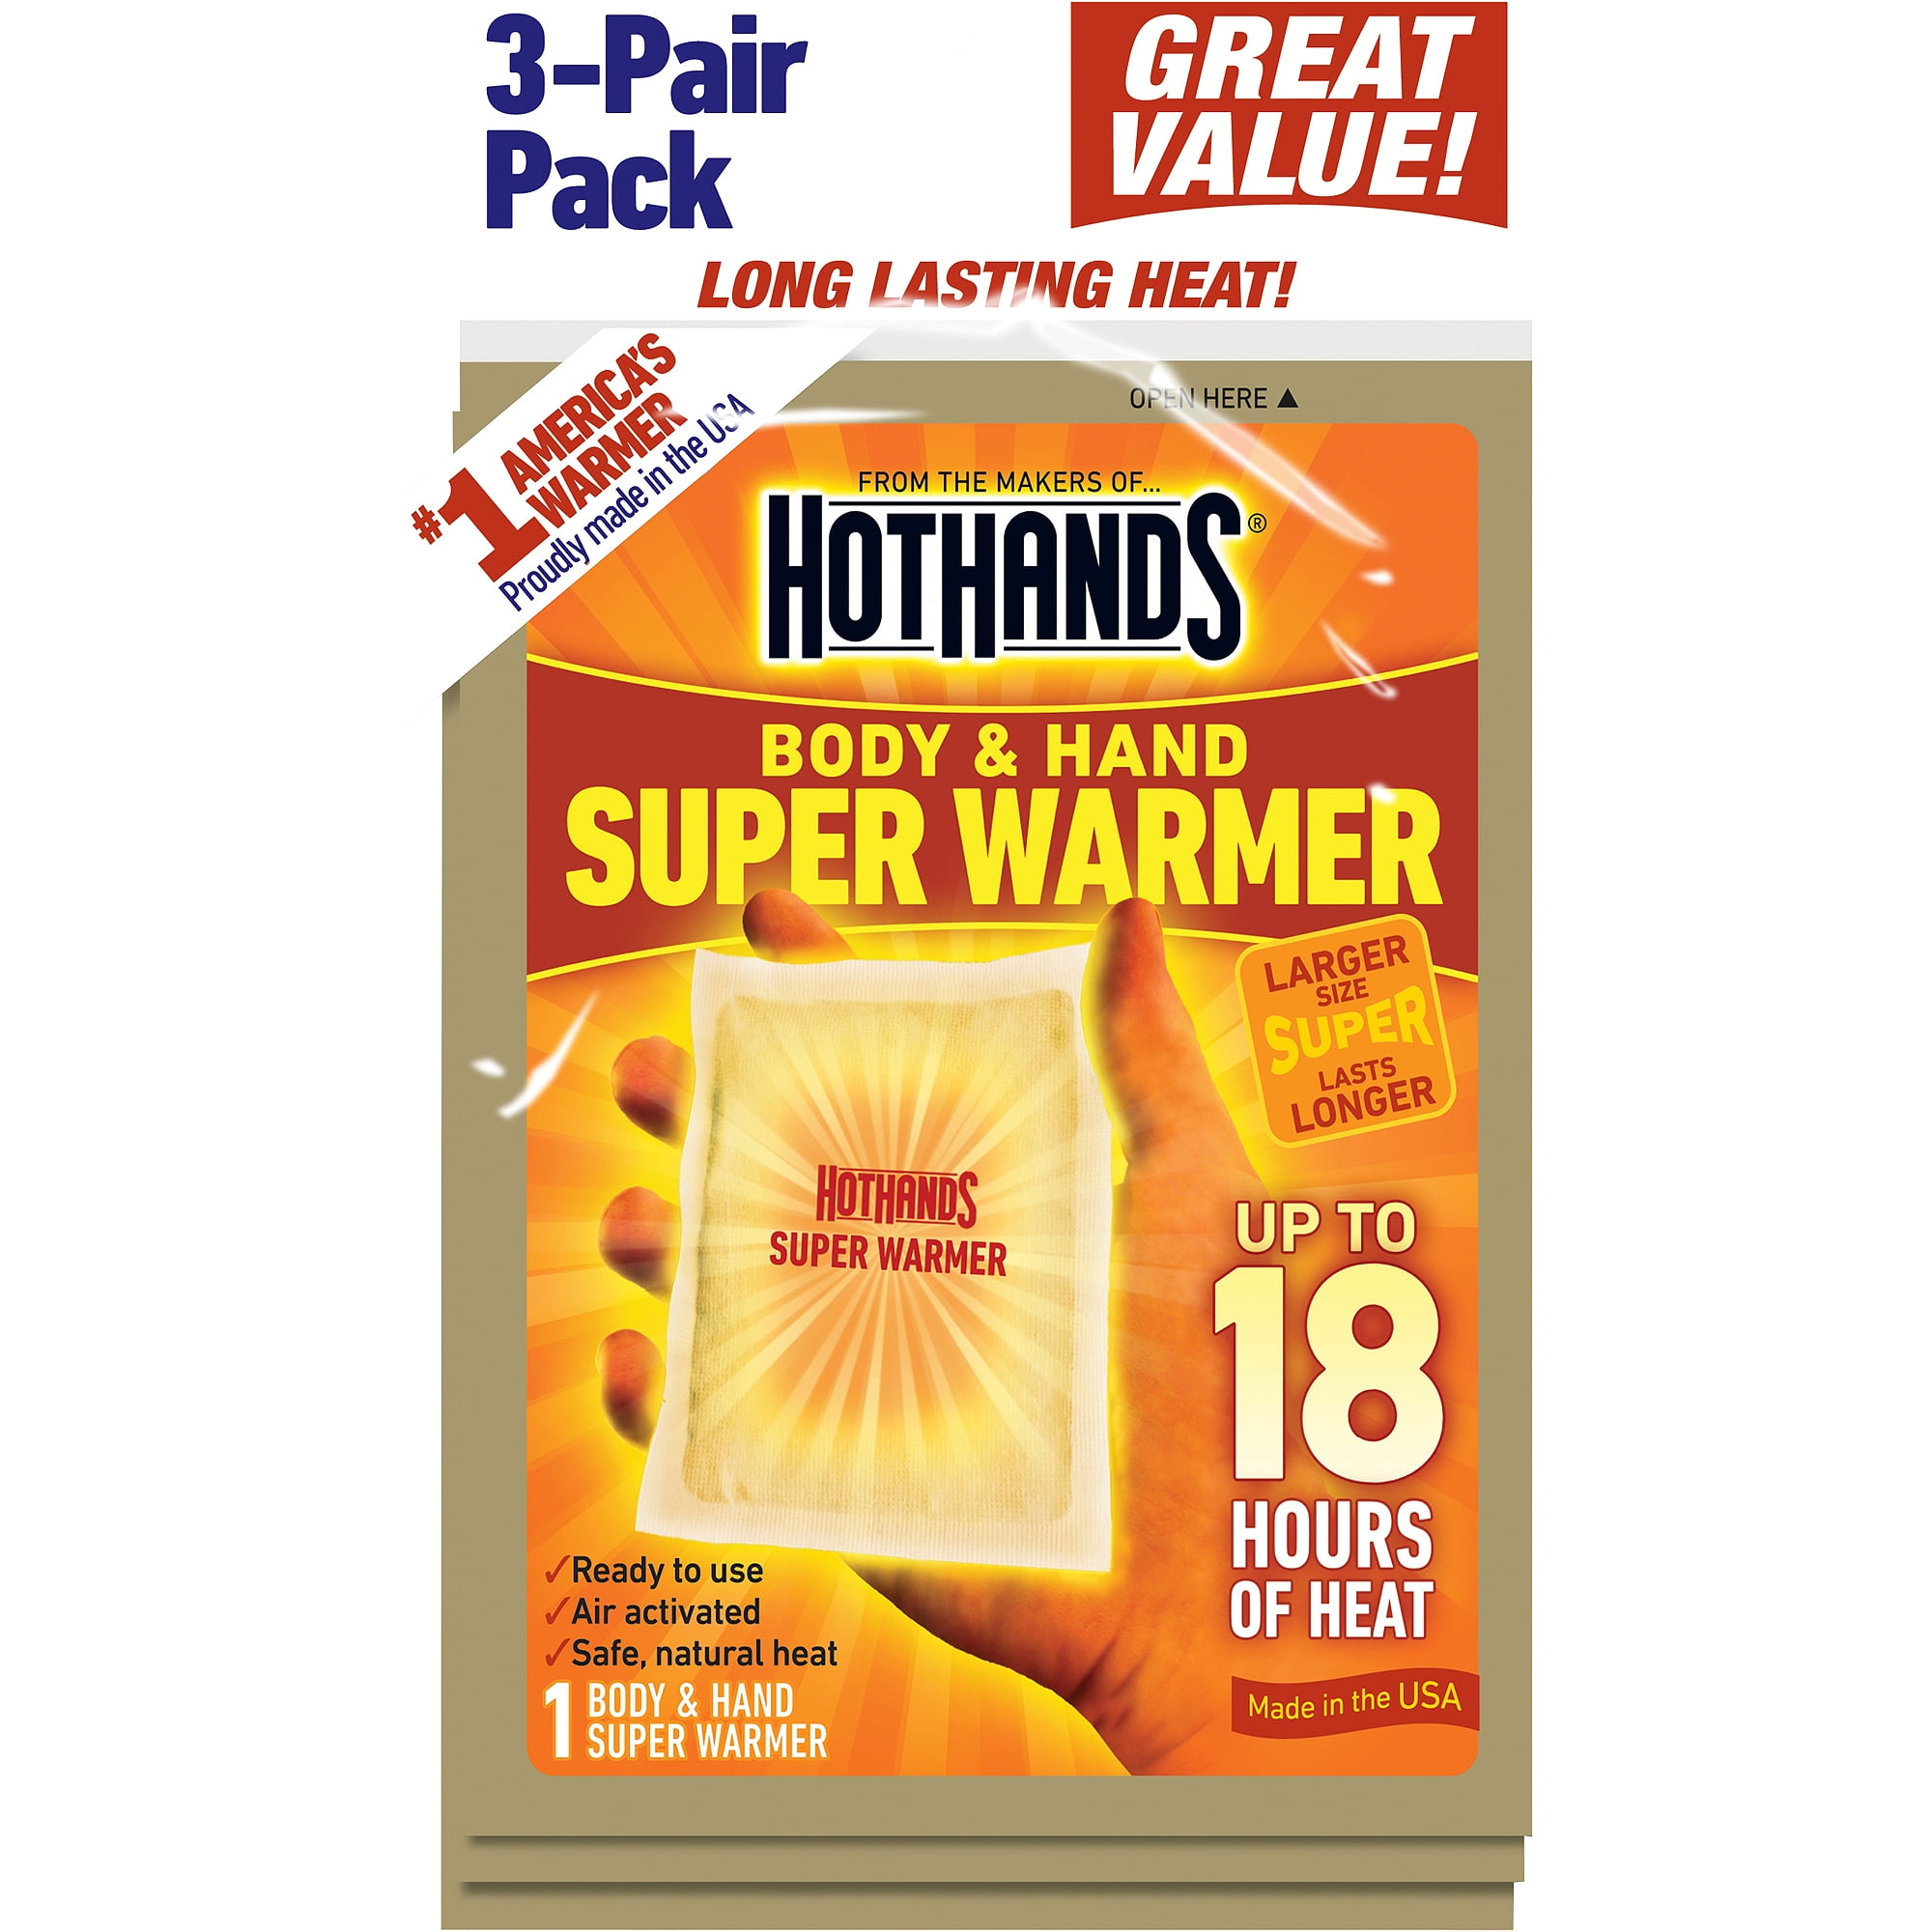 HotHands HH1ADH Adhesive Body Warmer 8 Pack for sale online 